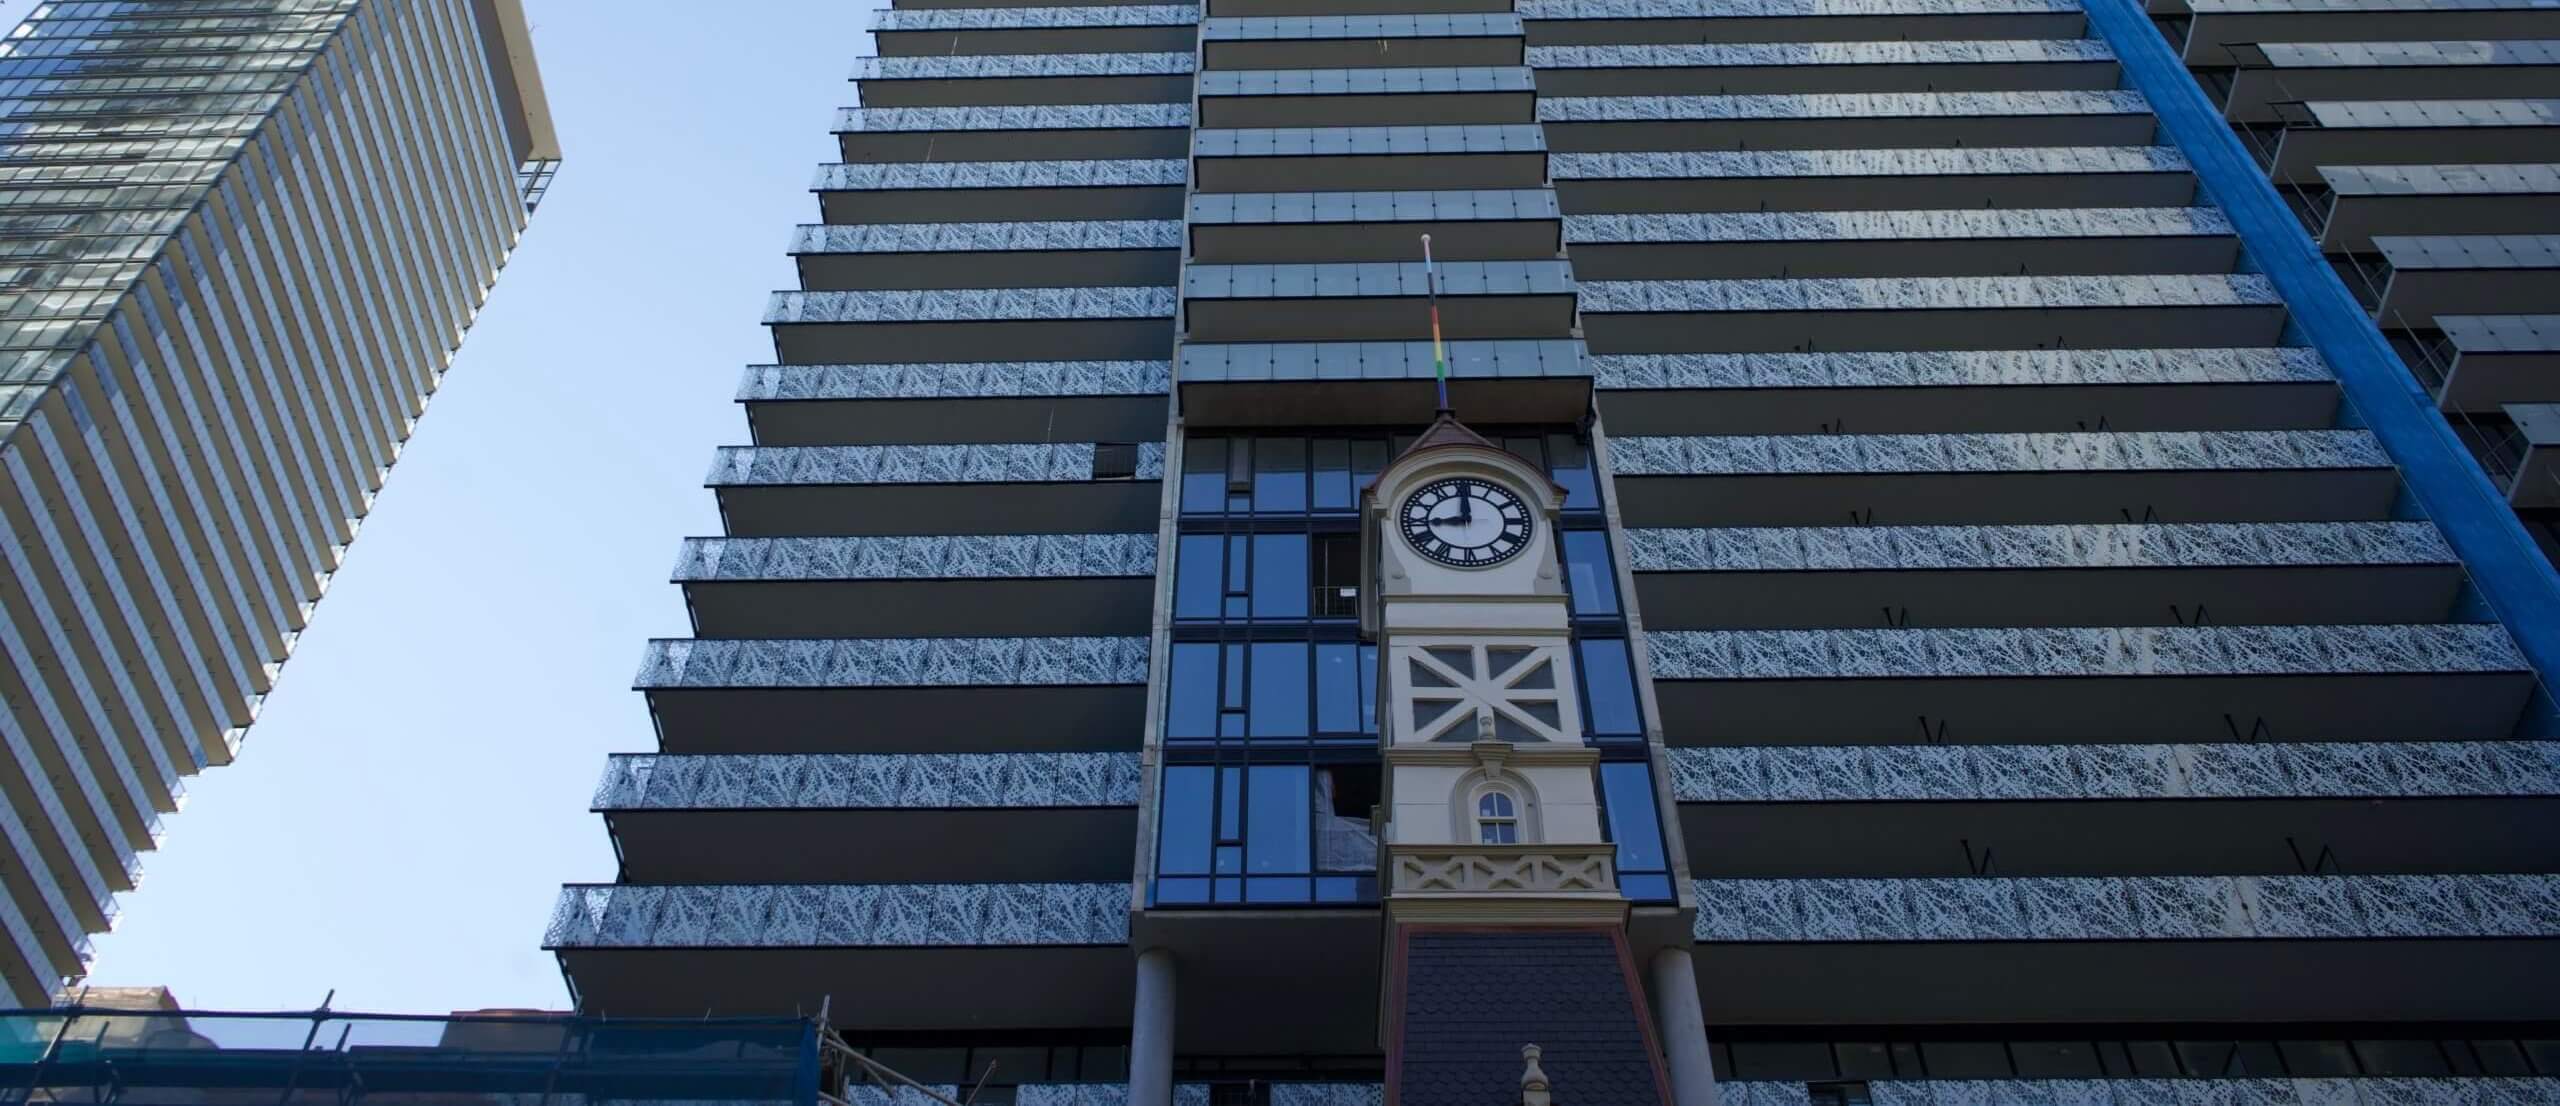 historic-clock-tower-restored-at-halo-residences-in-Toronto